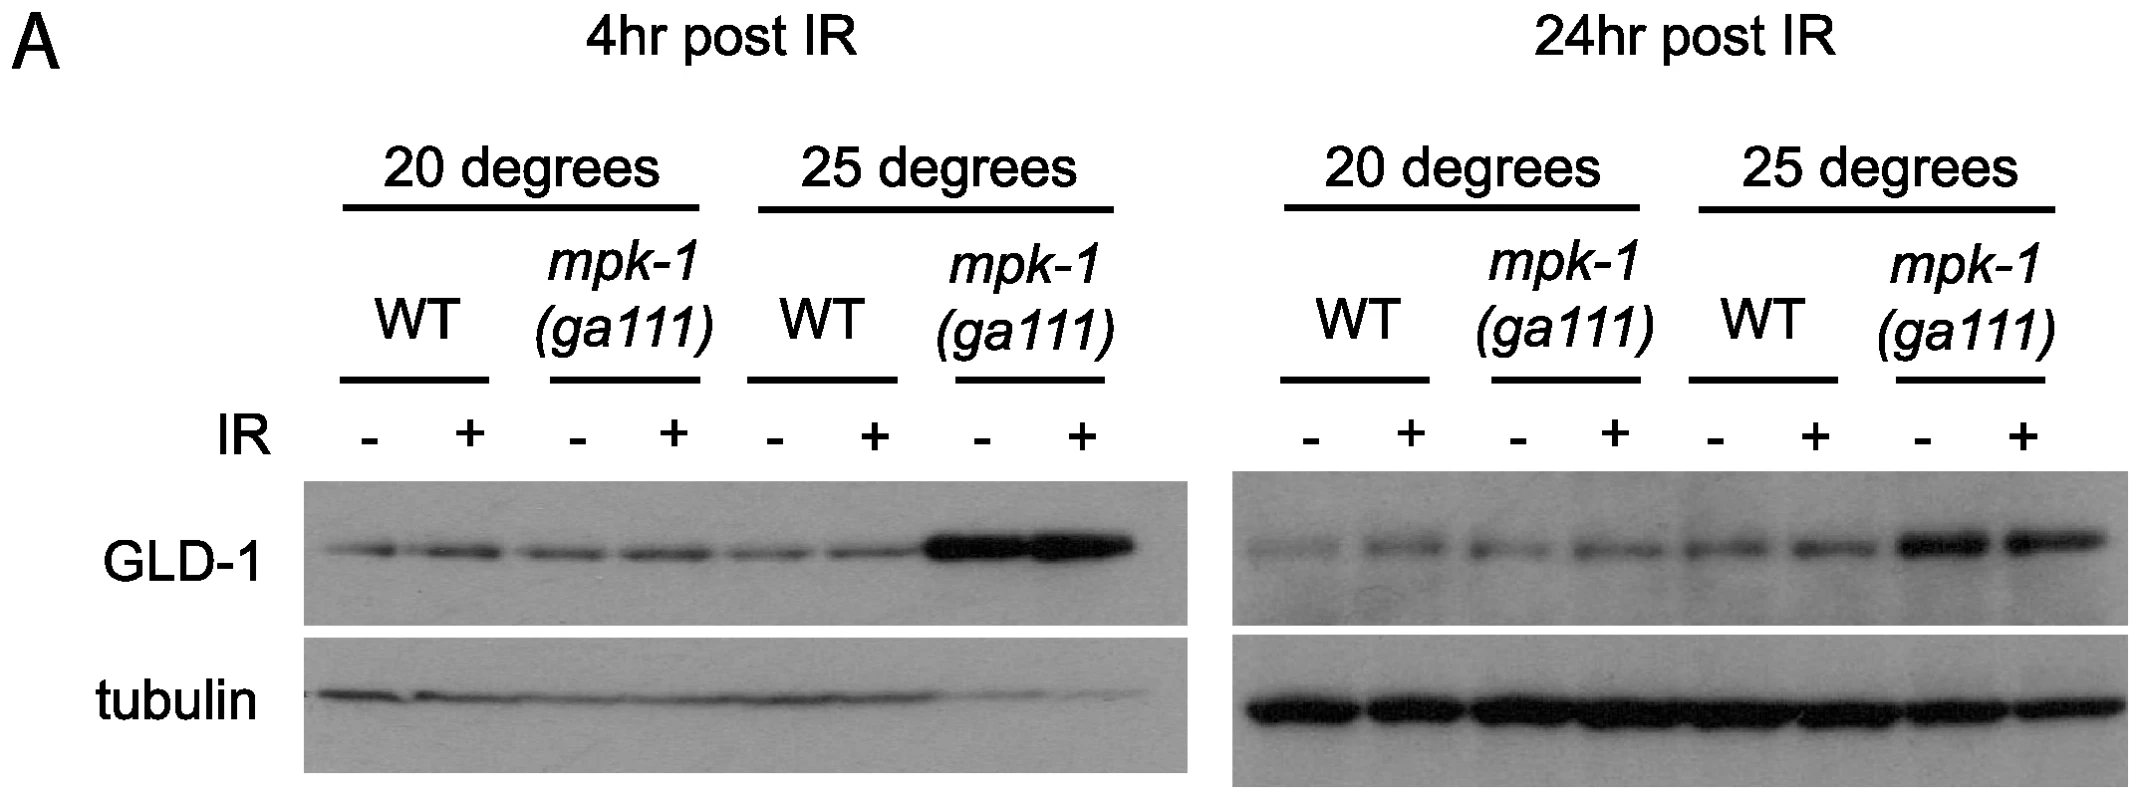 GLD-1 levels are affected by MPK-1 signaling.